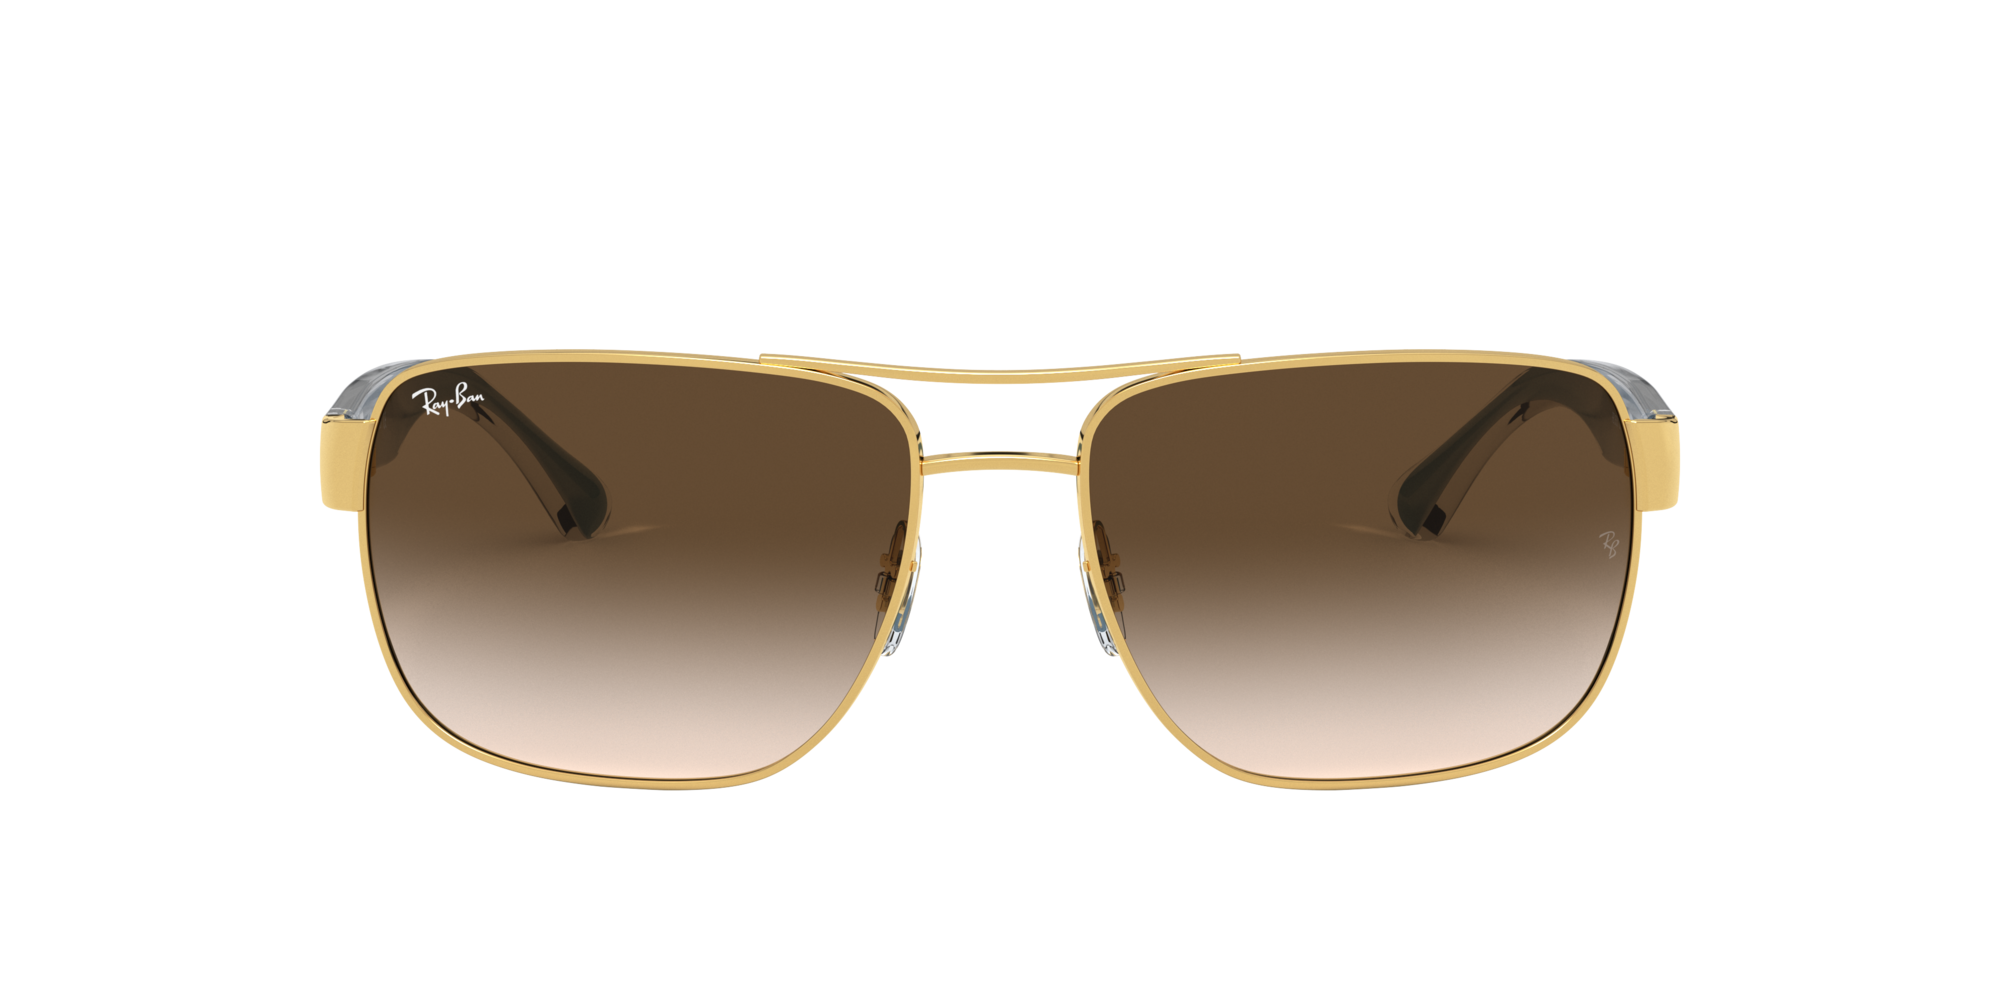 Ray-Ban RB3530 58 Brown Gradient \u0026 Gold 